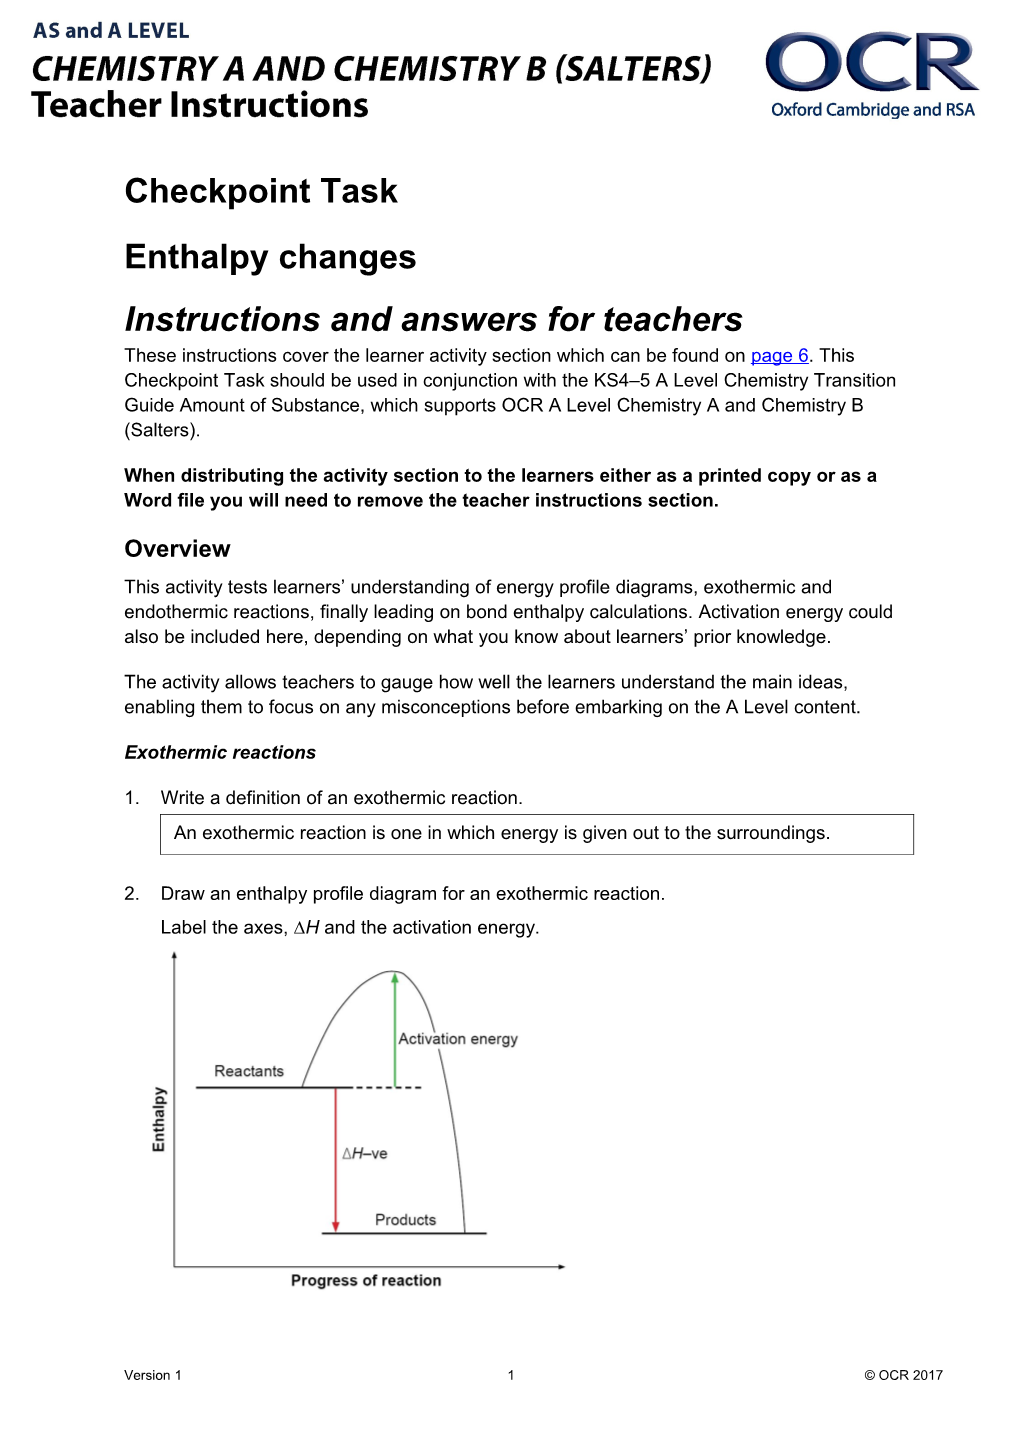 OCR AS and a Level Chemistry a and Chemistry B (Salters) Checkpoint Task - Enthalpy Changes